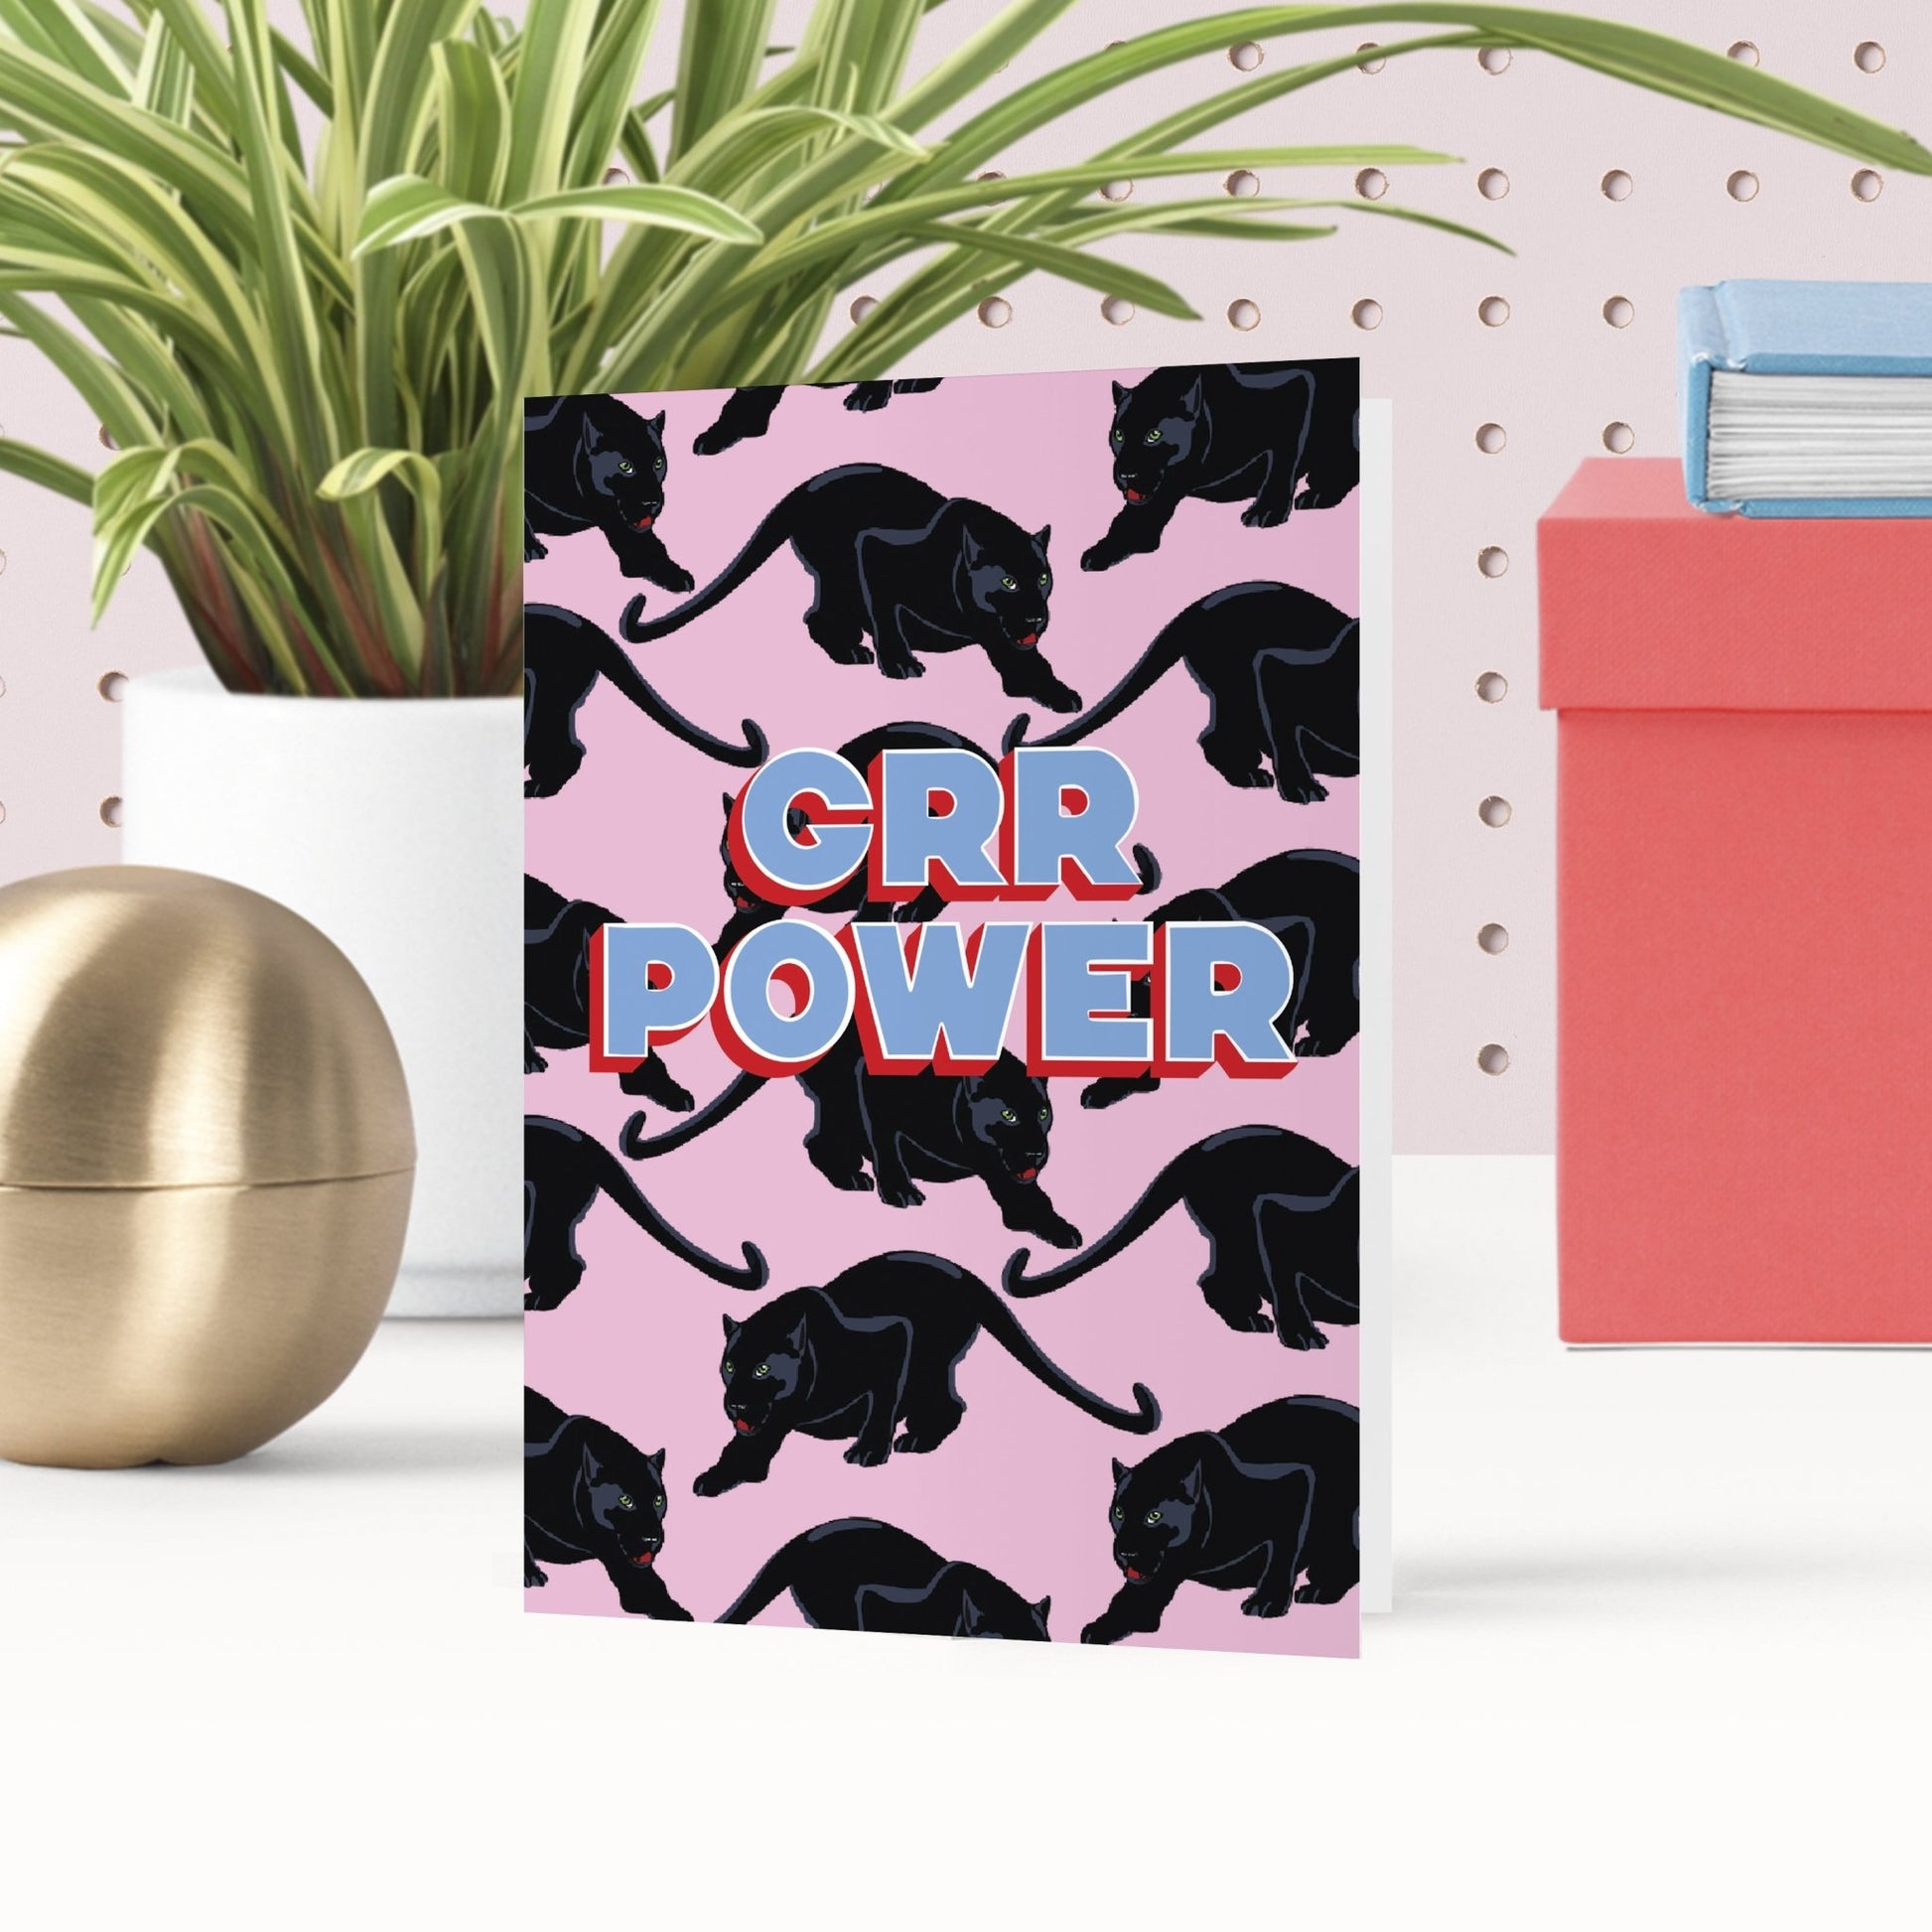 Grr Power Panther Greetings Card - Fawn and Thistle